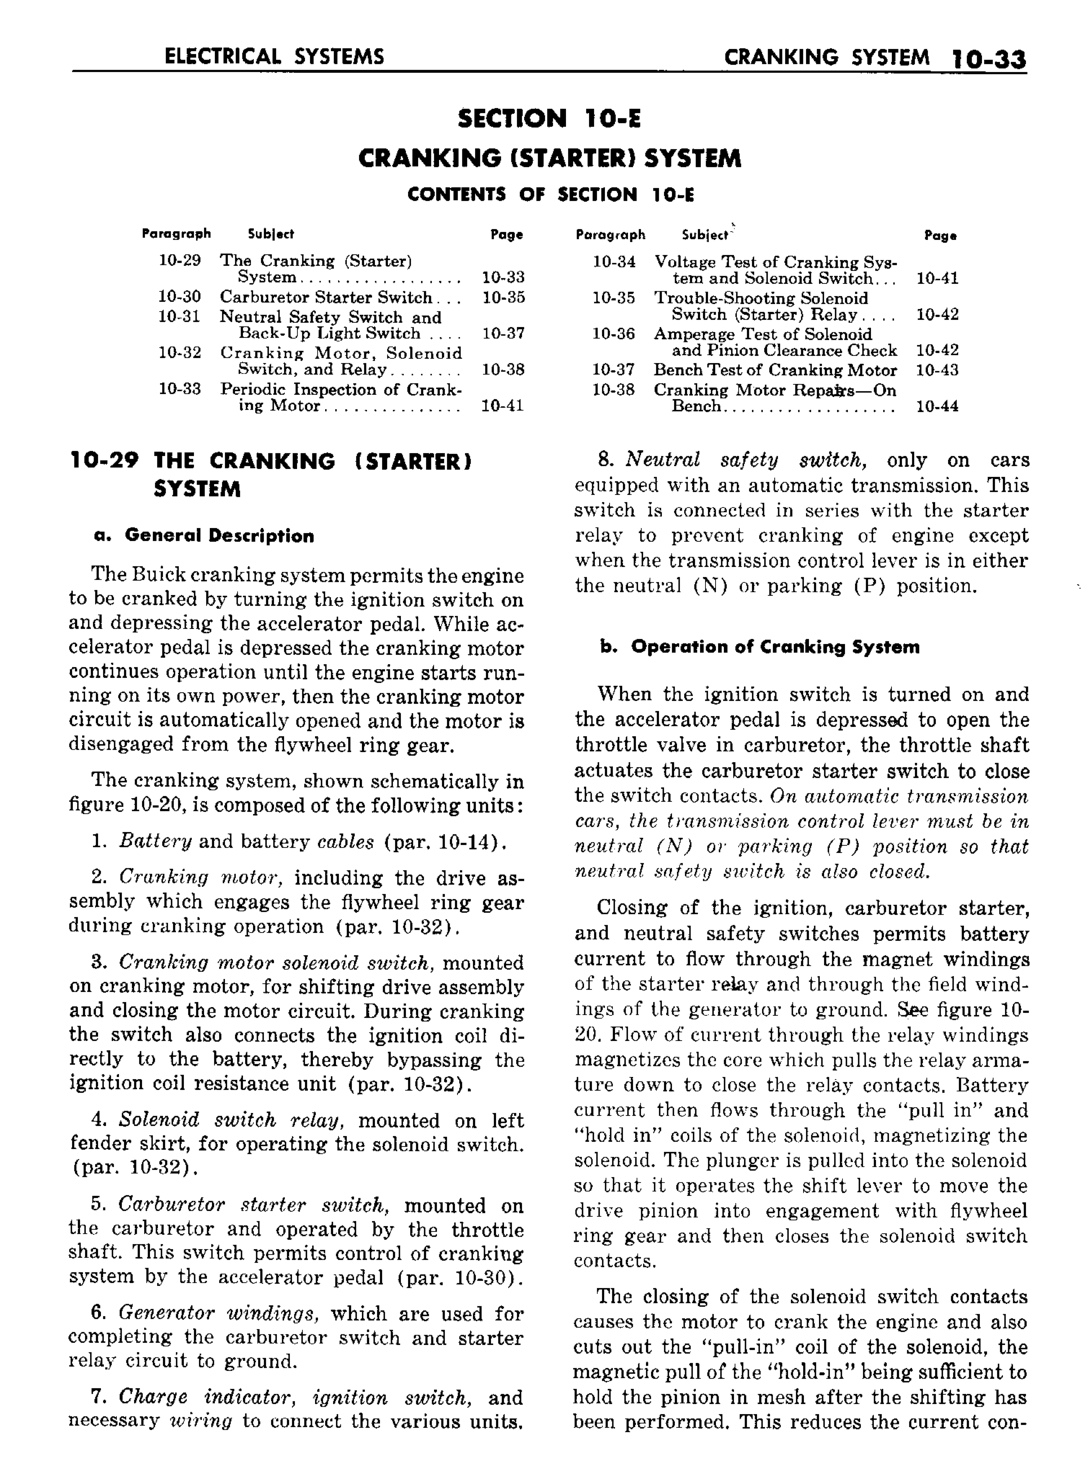 n_11 1960 Buick Shop Manual - Electrical Systems-033-033.jpg